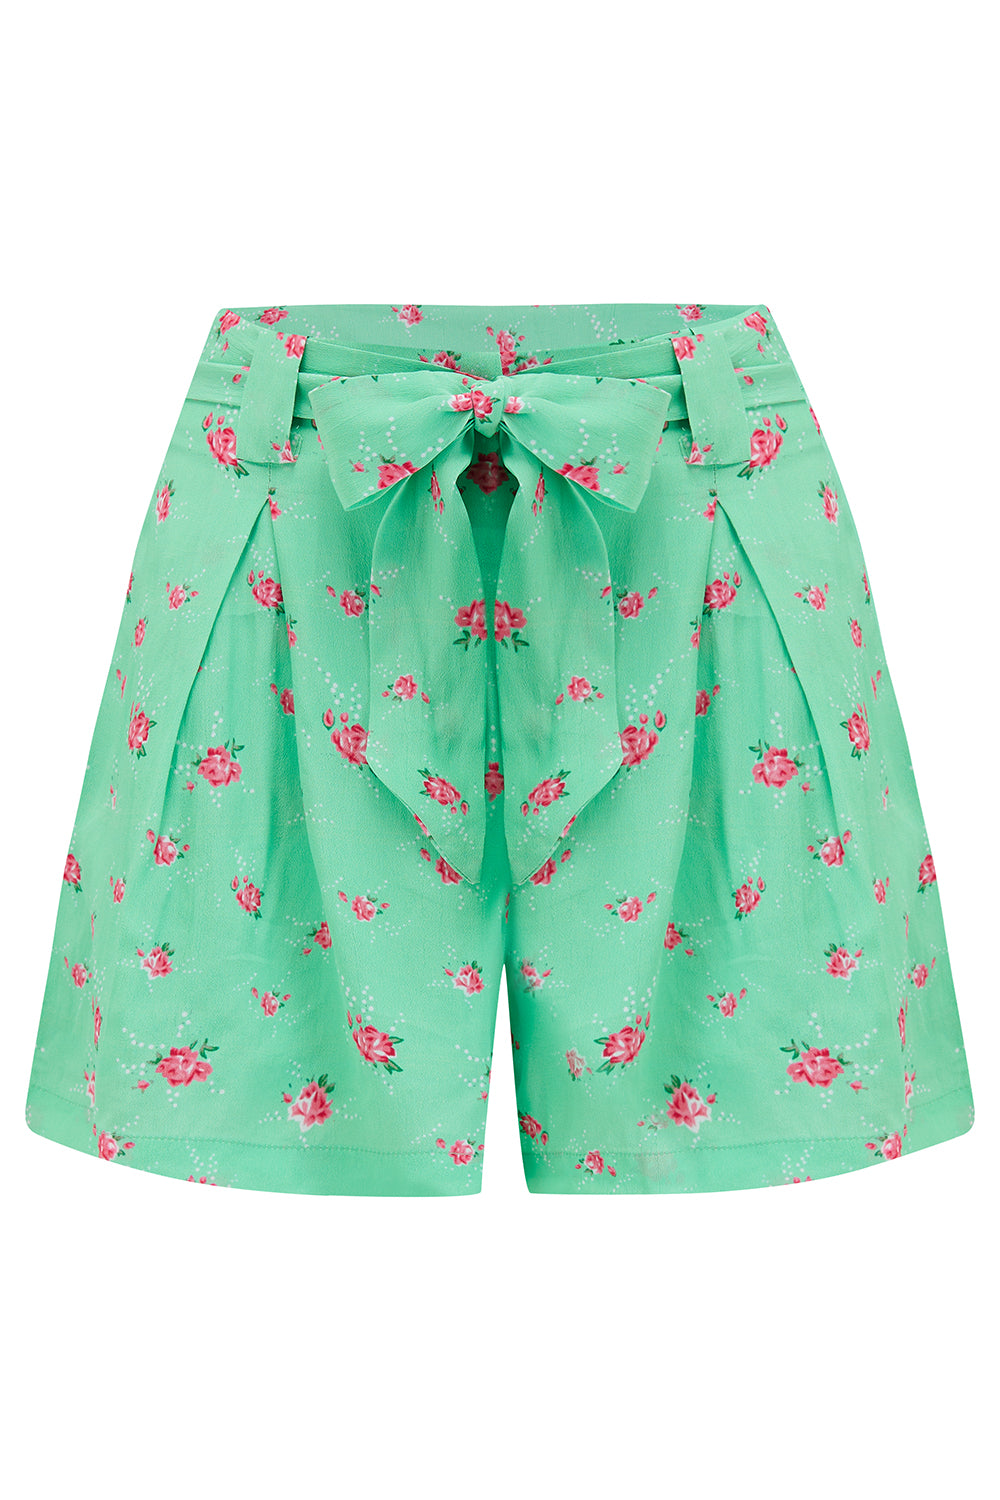 Emma vintage styled Tap Shorts in Mint Rose Print